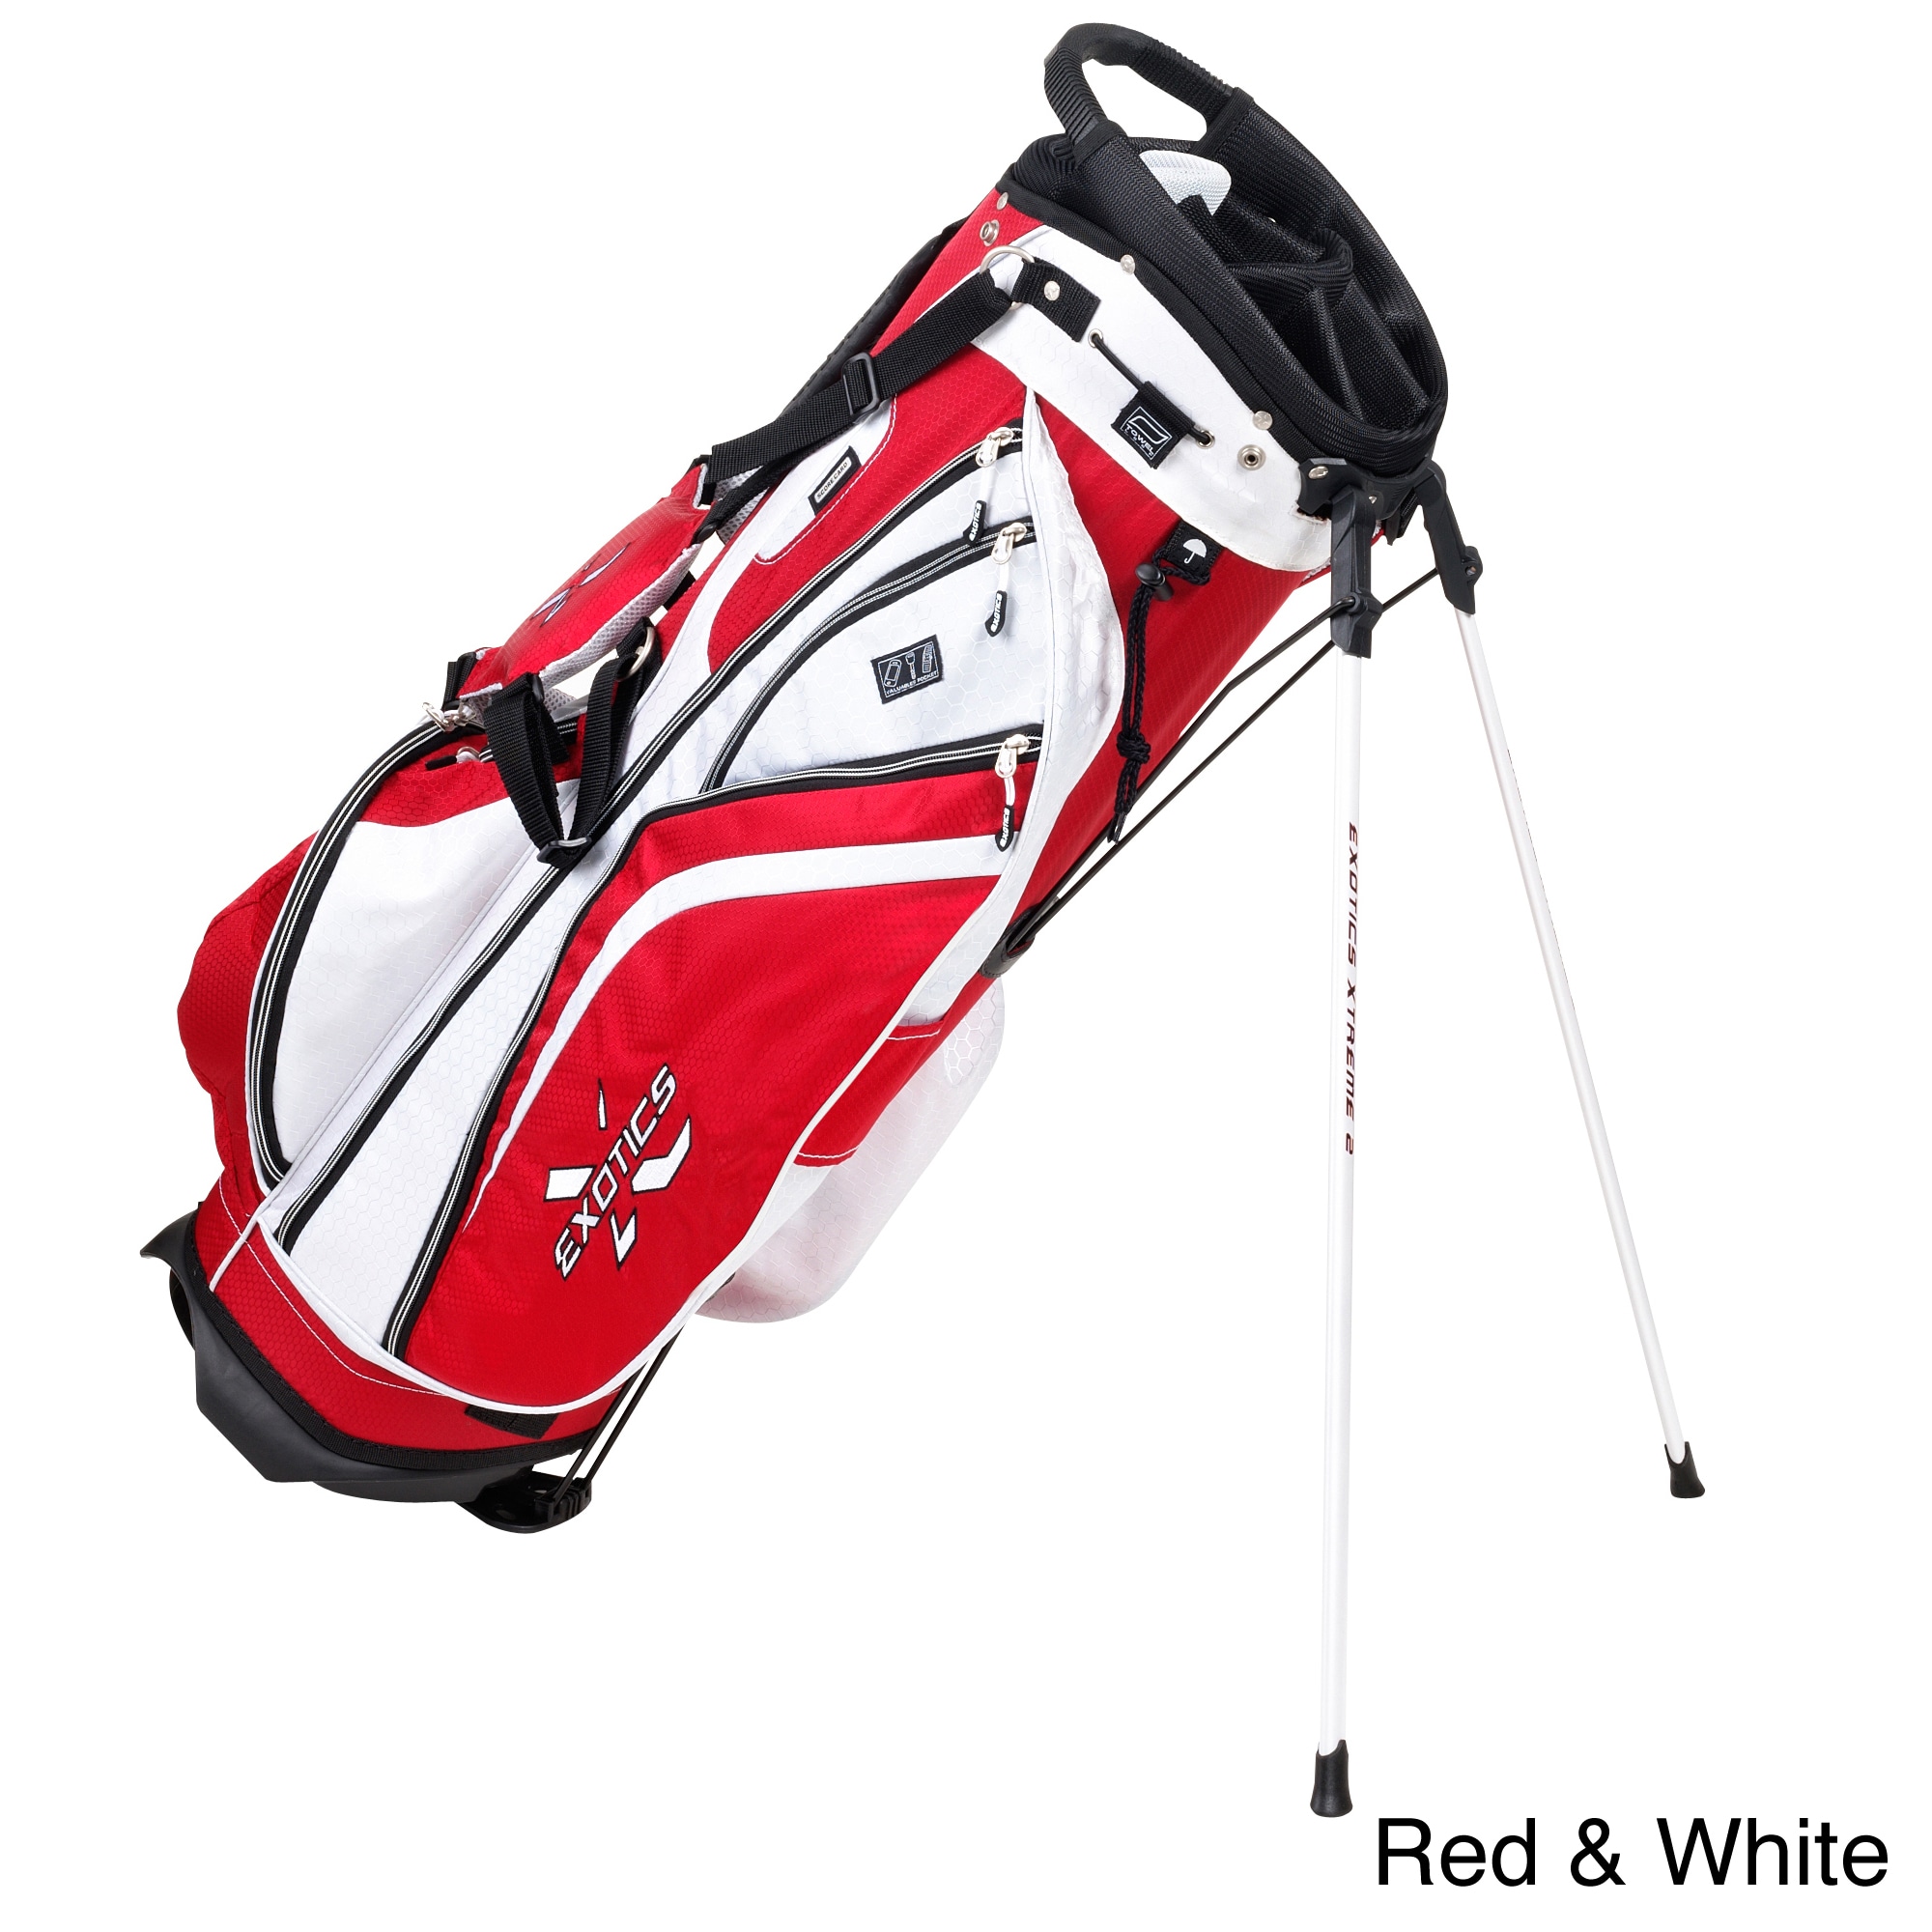 Tour Edge Exotics Xtreme 2 Stand Bag (Black, red/white, navy/white, white, black/pink, silver/whiteMolded easy lift top handleScore card holderPremium padded double strap Quick grab elastic towel bandVelour lined water proof valuables pocketLightweight qu